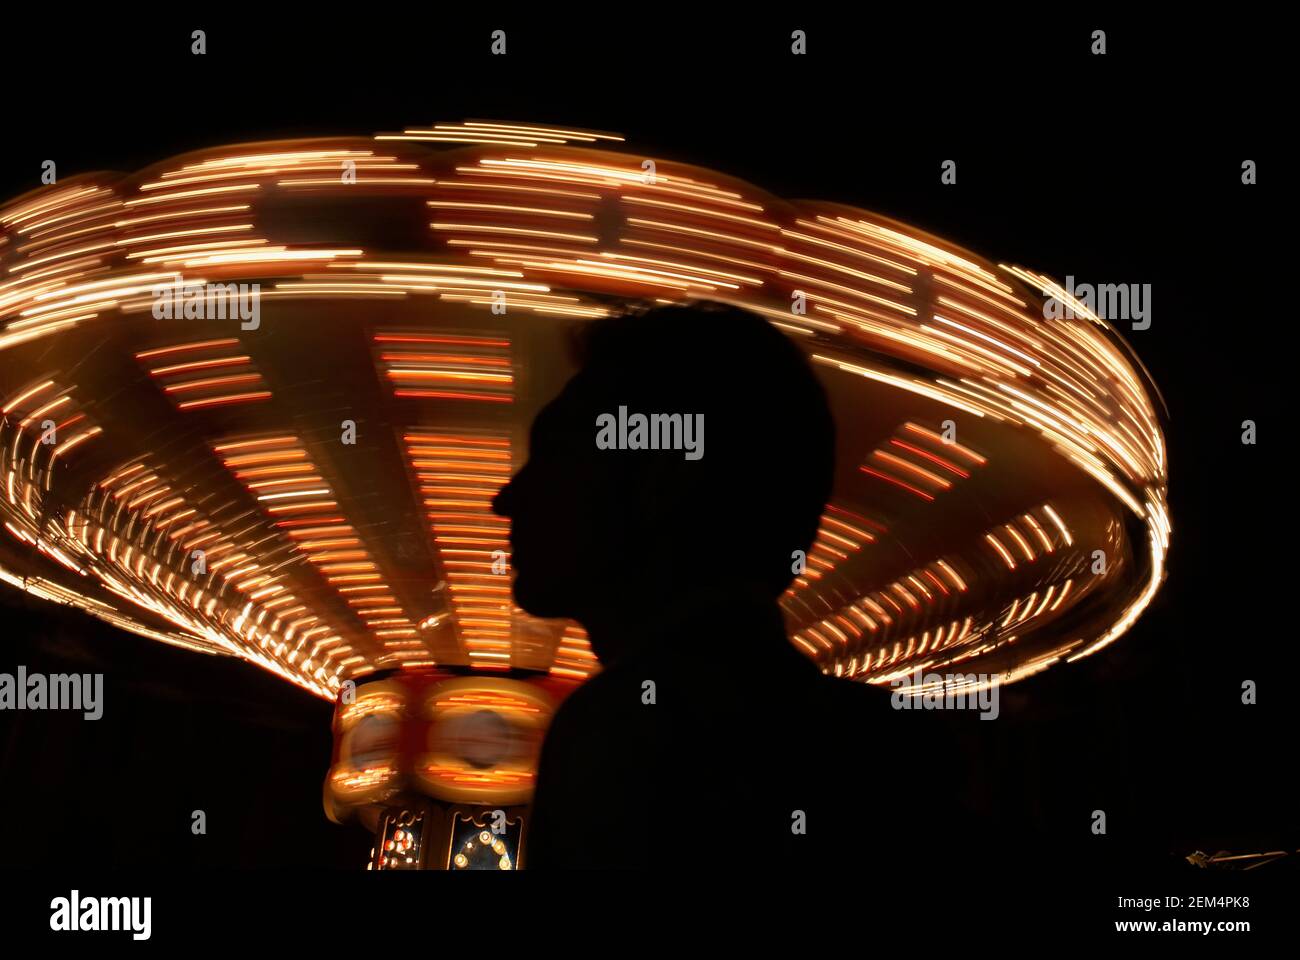 Silhouette of a person in front of a spinning carousel at night Stock Photo